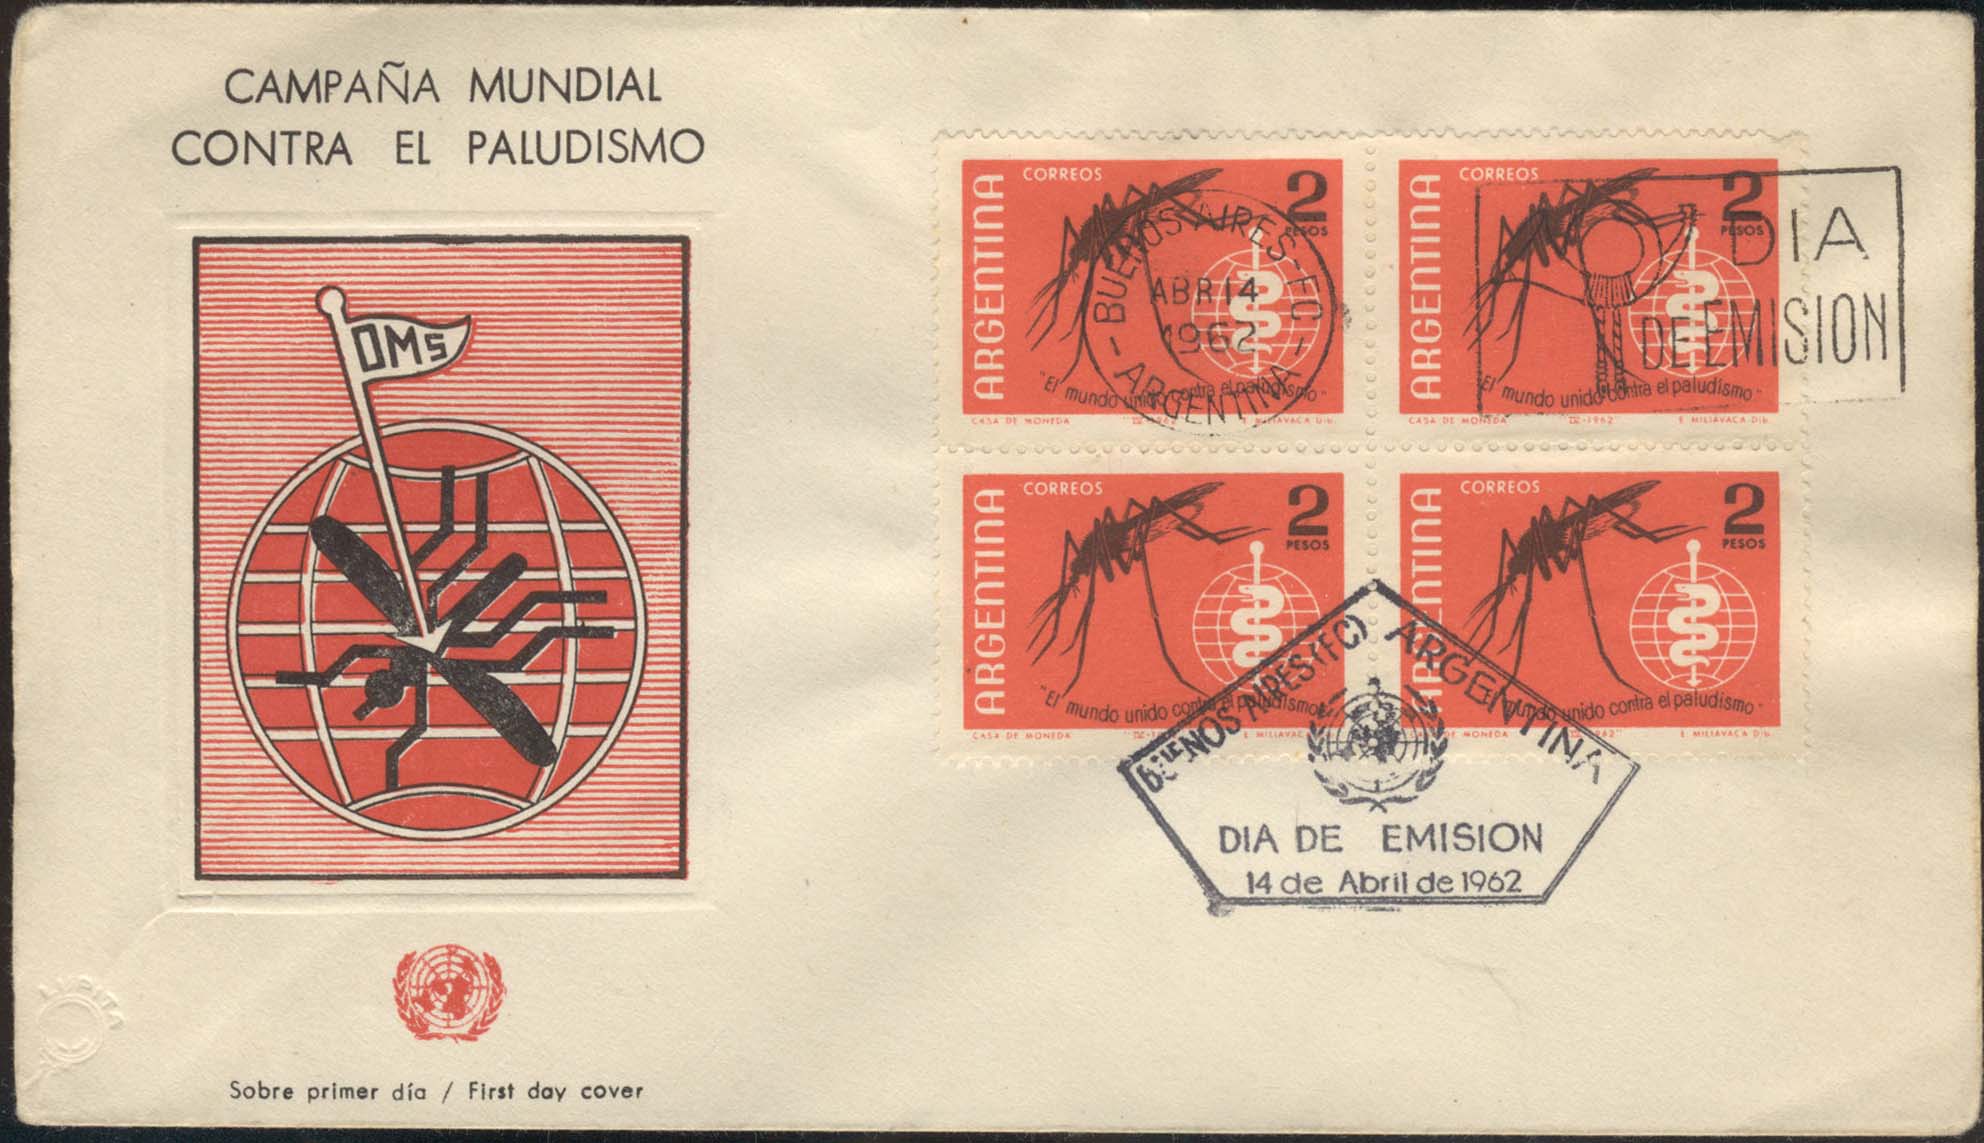 Scott 737 (Block of 4) (FDC w/ Mosquito/Flag (Red/Black)<br>(Buenos Aries Cancellation) (Buenos Aries - Horn Cancellation))